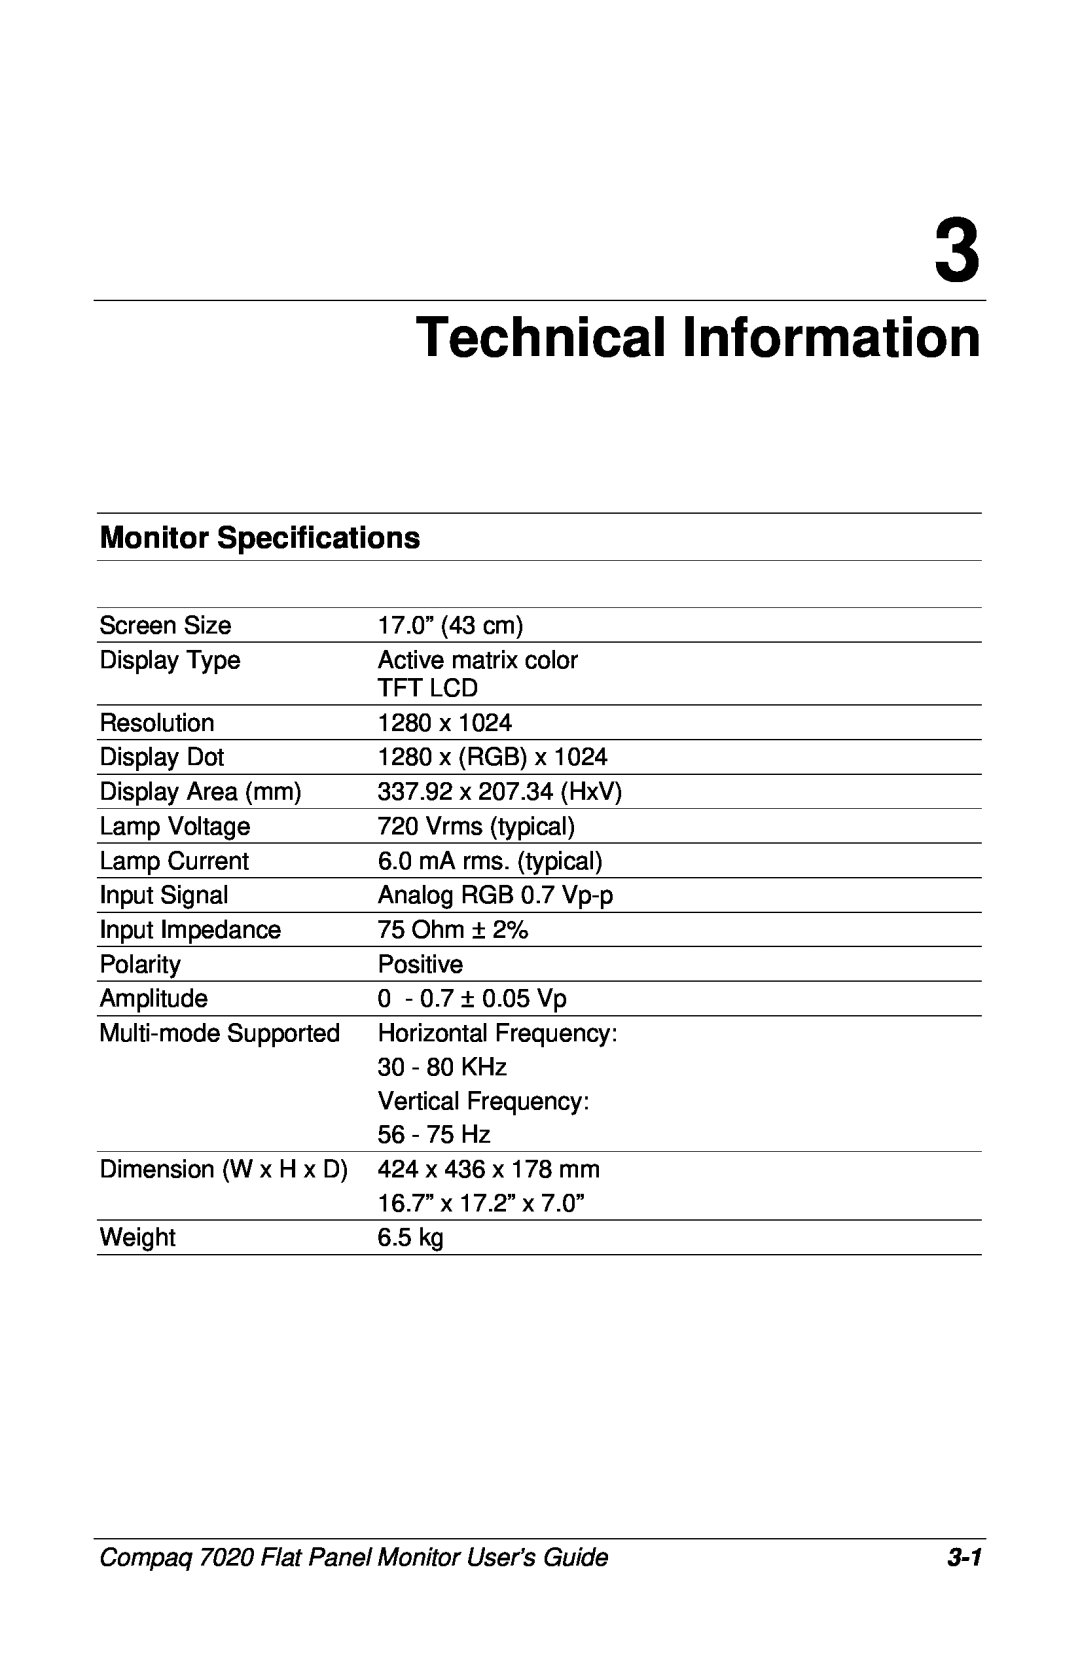 Compaq manual Technical Information, Monitor Specifications, Compaq 7020 Flat Panel Monitor User’s Guide 